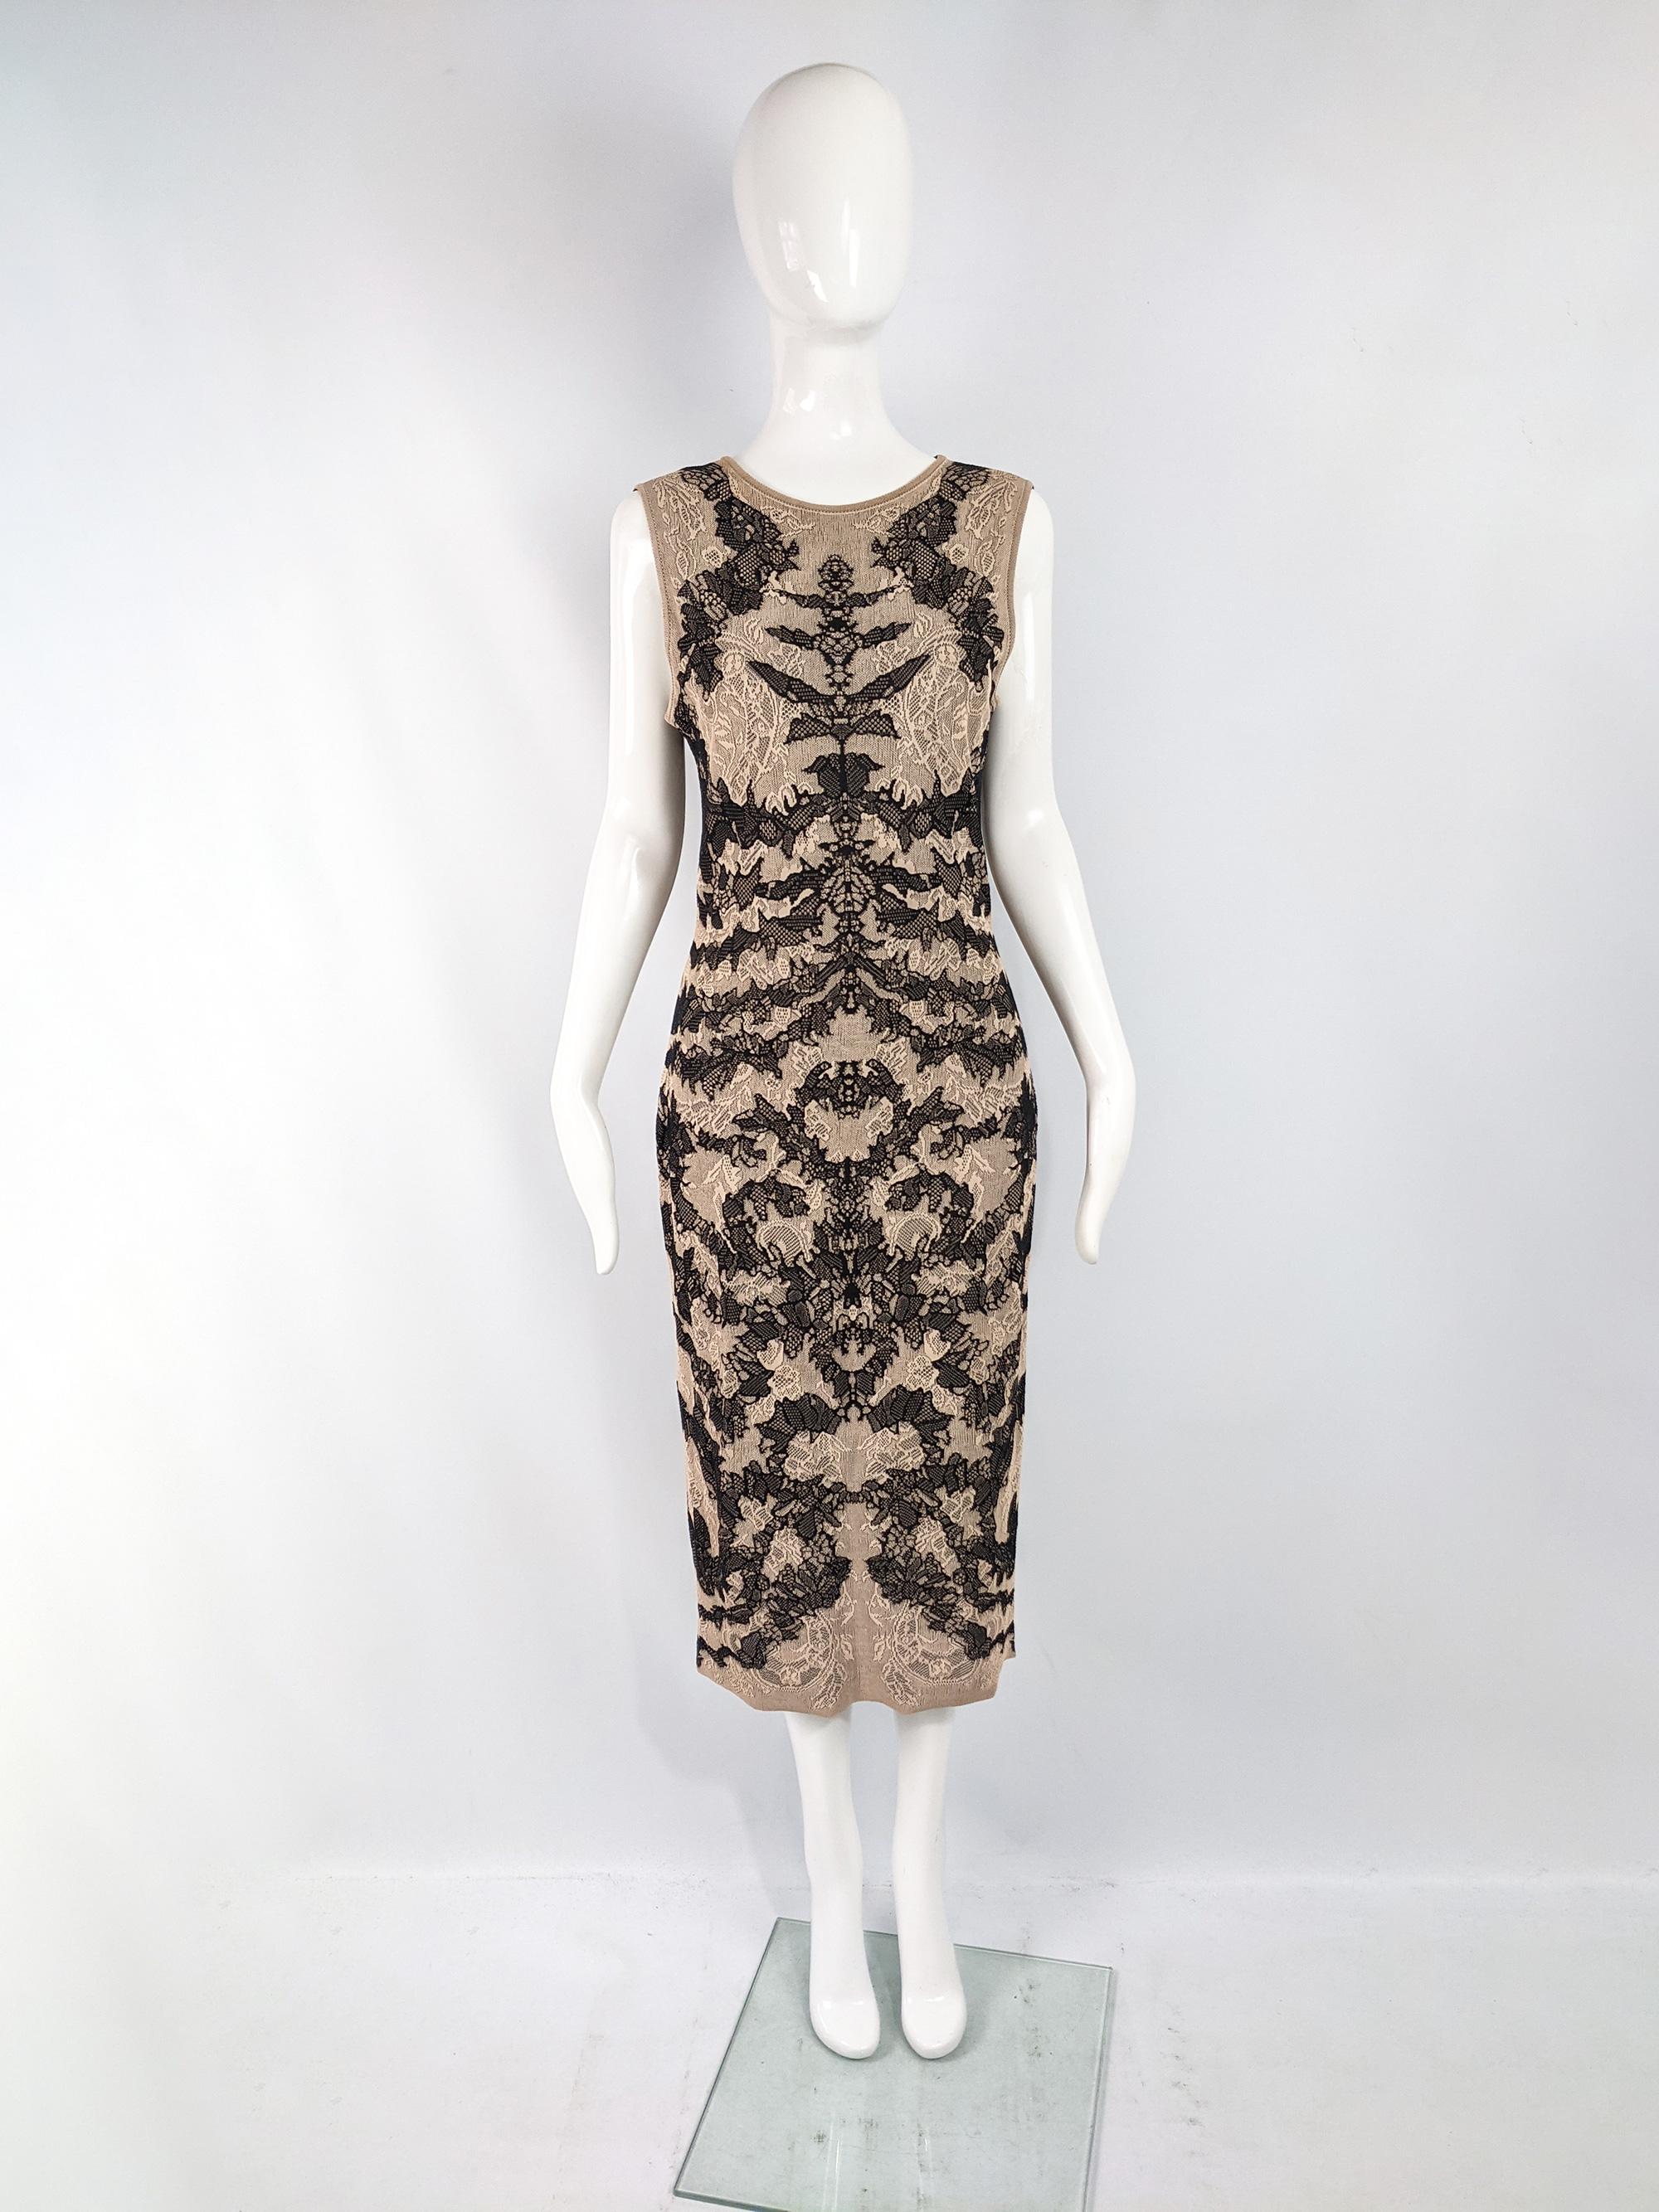 A beautiful womens Alexander McQueen dress. In a nude and black viscose and silk knit fabric with a textured intarsia / jacquard knitted technique. Perfect for a party in the evening. 

Size: Marked L but measures like a UK 12/ US 8. Please check